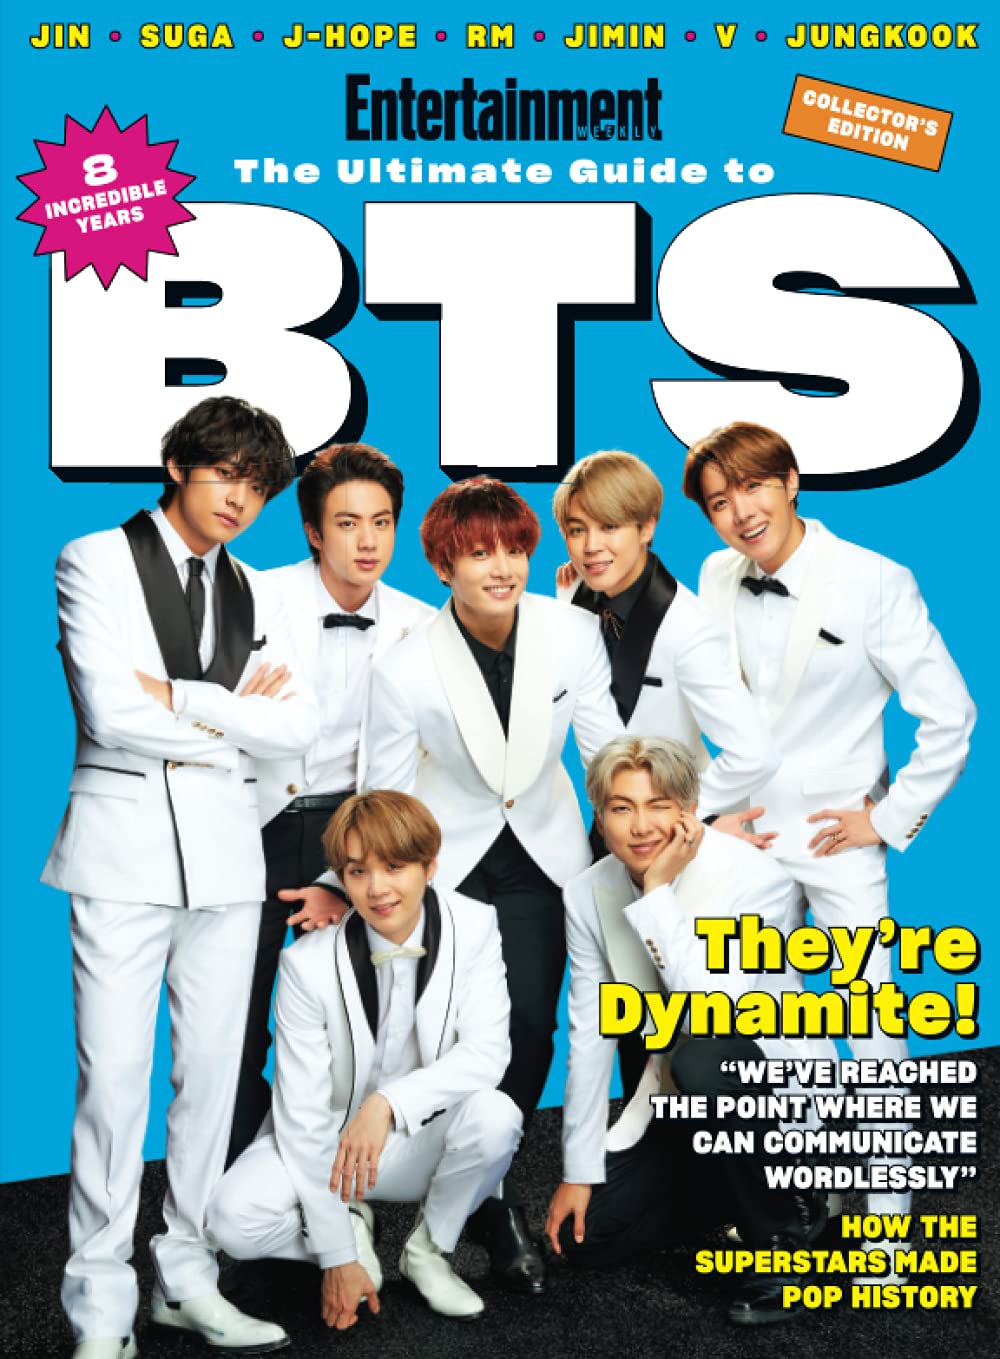 Entertainment: The Ultimate Guide to BTS Magazine